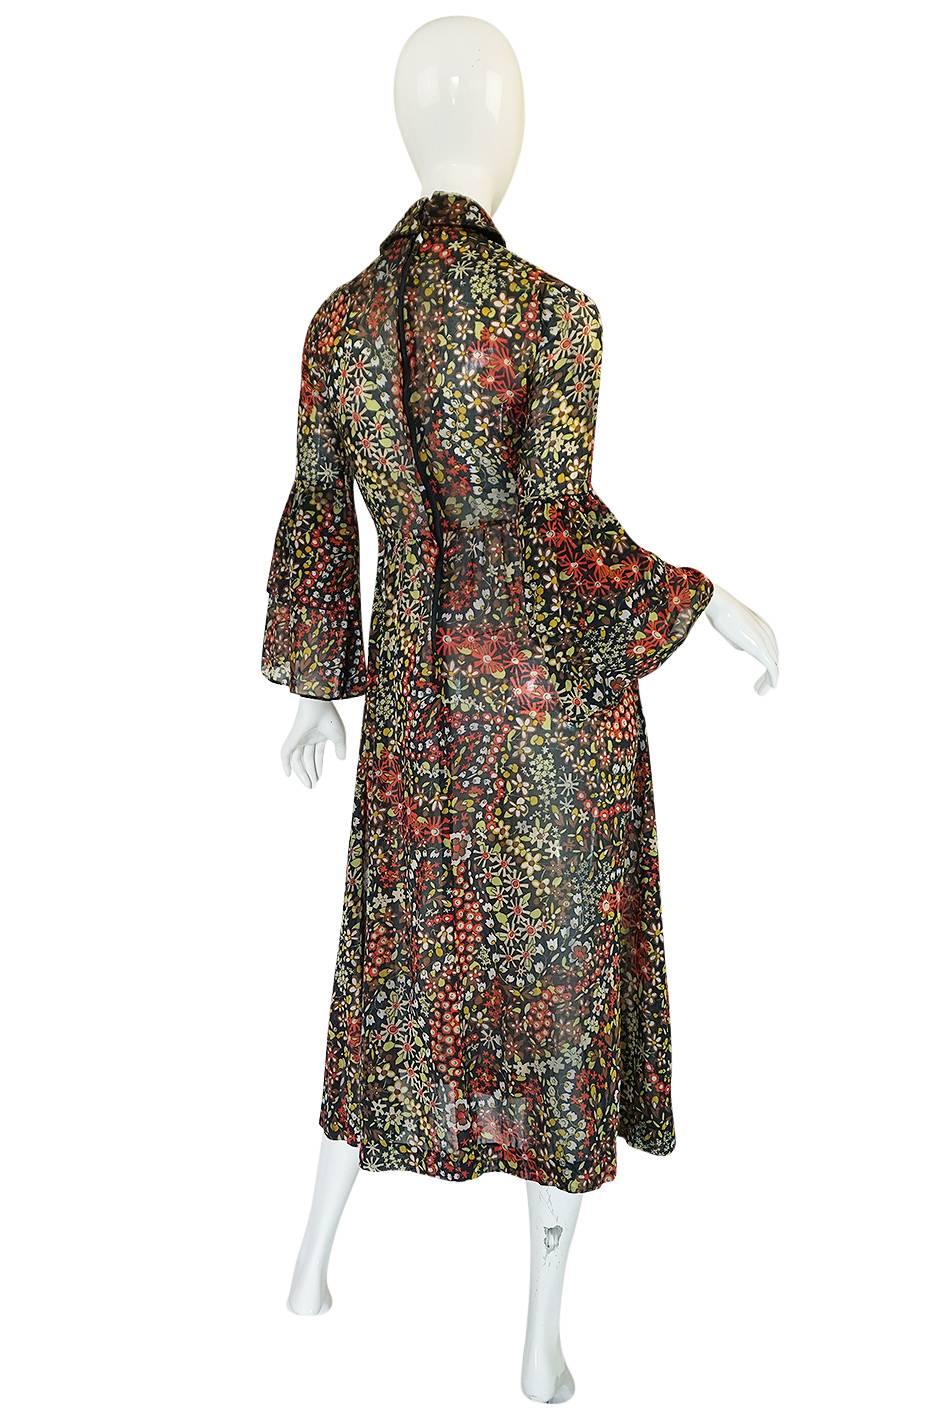 

Bus Stop was a boutique label and the shop it originated from was started by Lee Bender. The first opened in 1968 and it was eventually sold to a larger chain in 1979. This dress probably dates form the late 60s - early 70s period and is a great